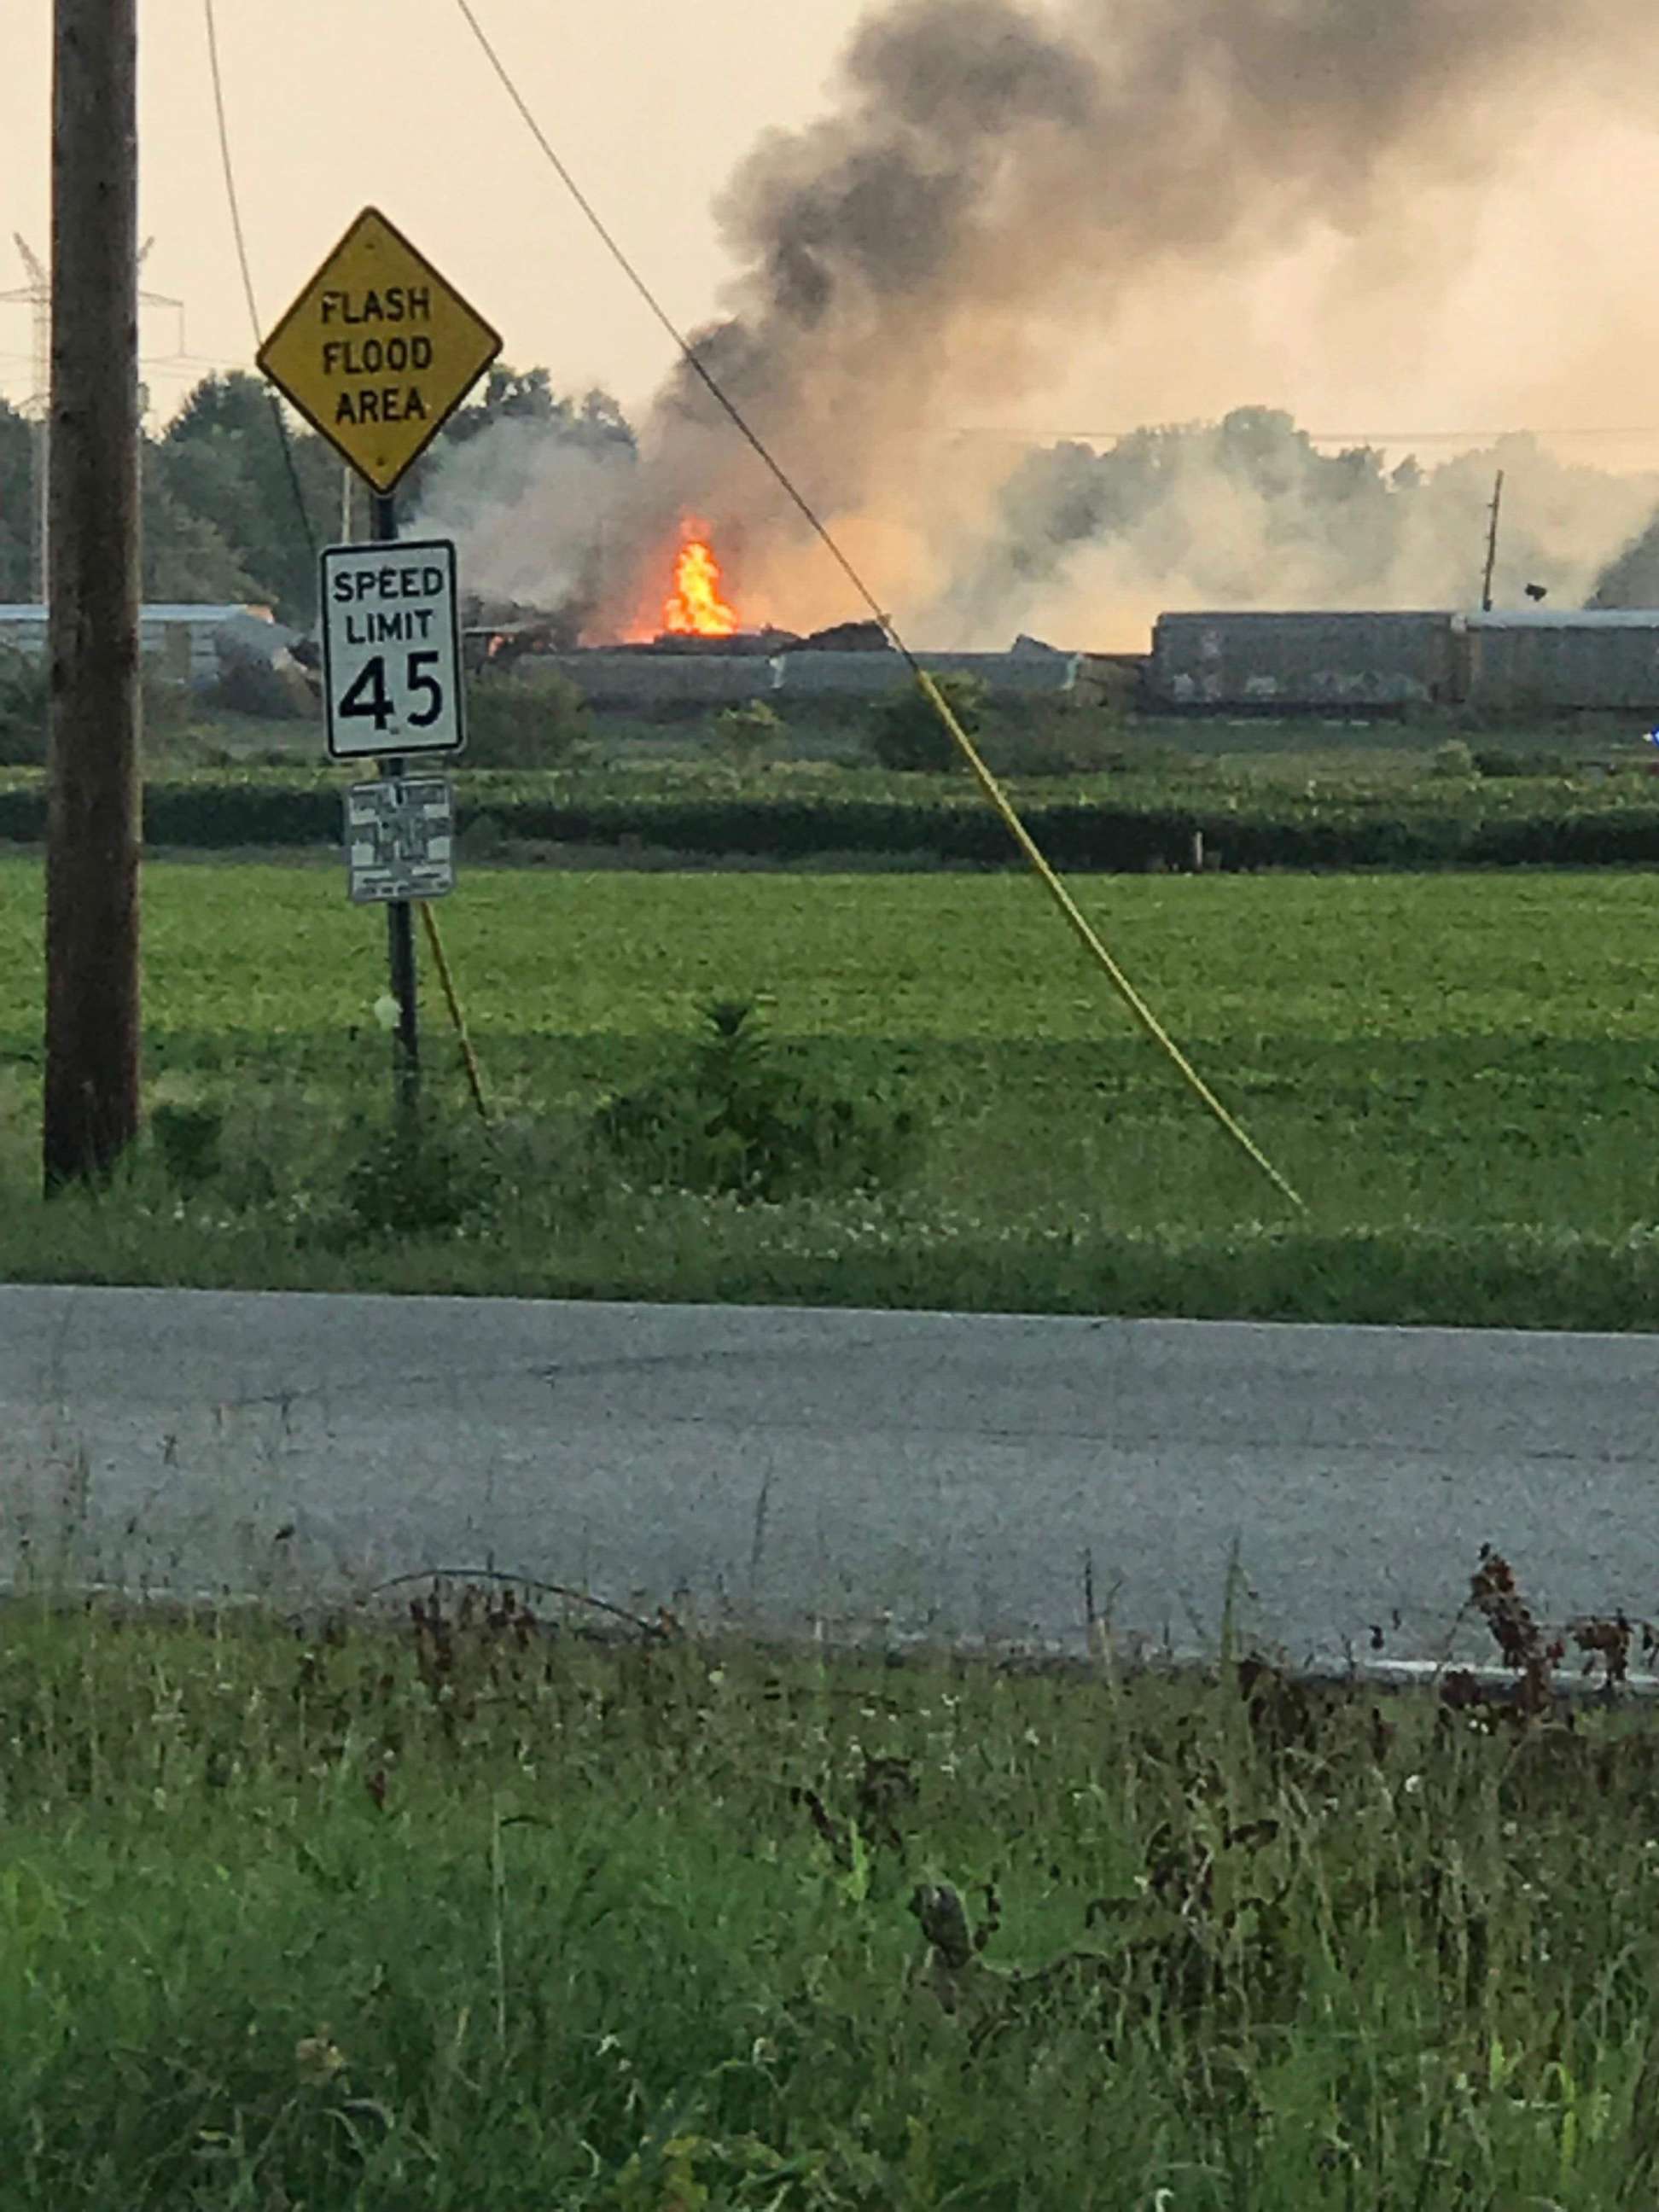 A train carrying freight derailed in Gibson County, Ind., prompting evacuations on Sunday, June 17, 2018.